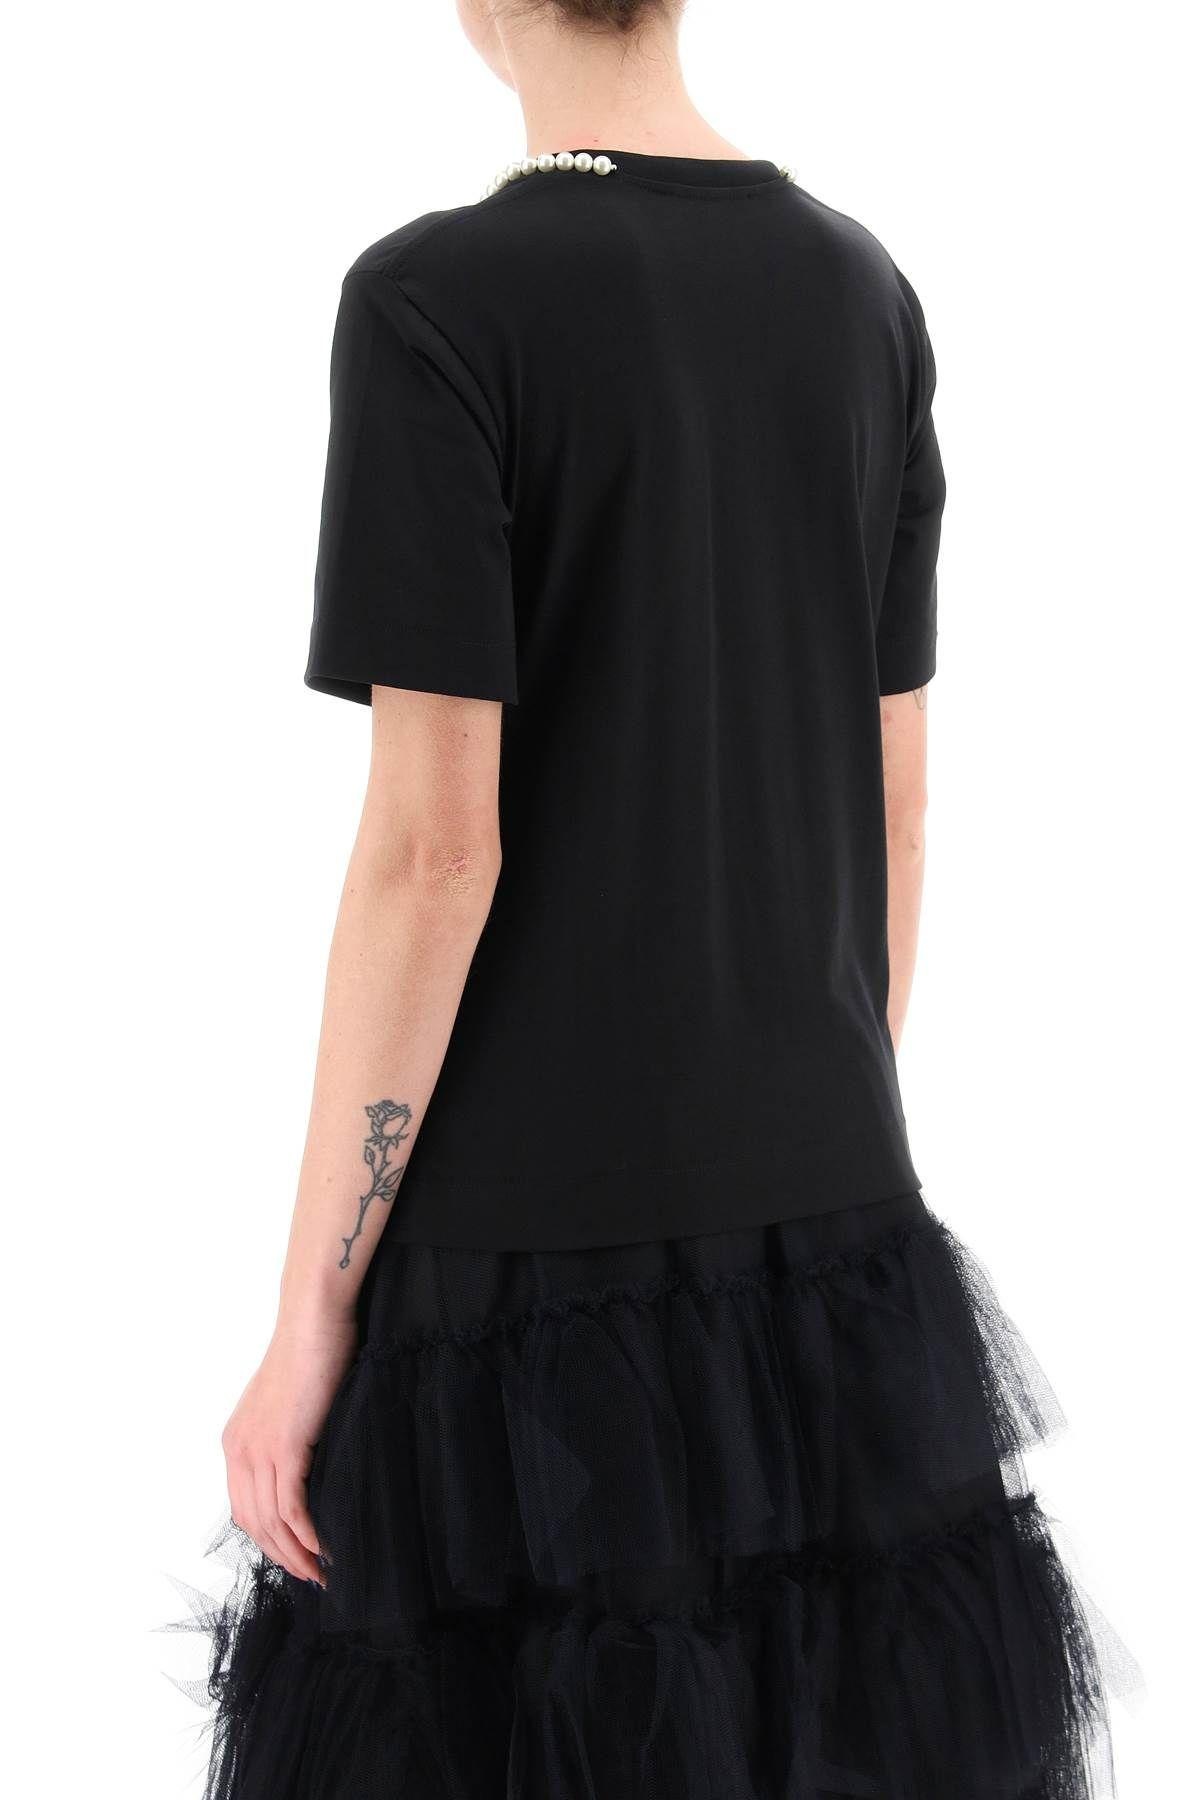 T-SHIRT WITH HEART-SHAPED CUT-OUT AND PEARLS SIMONE ROCHA - 4